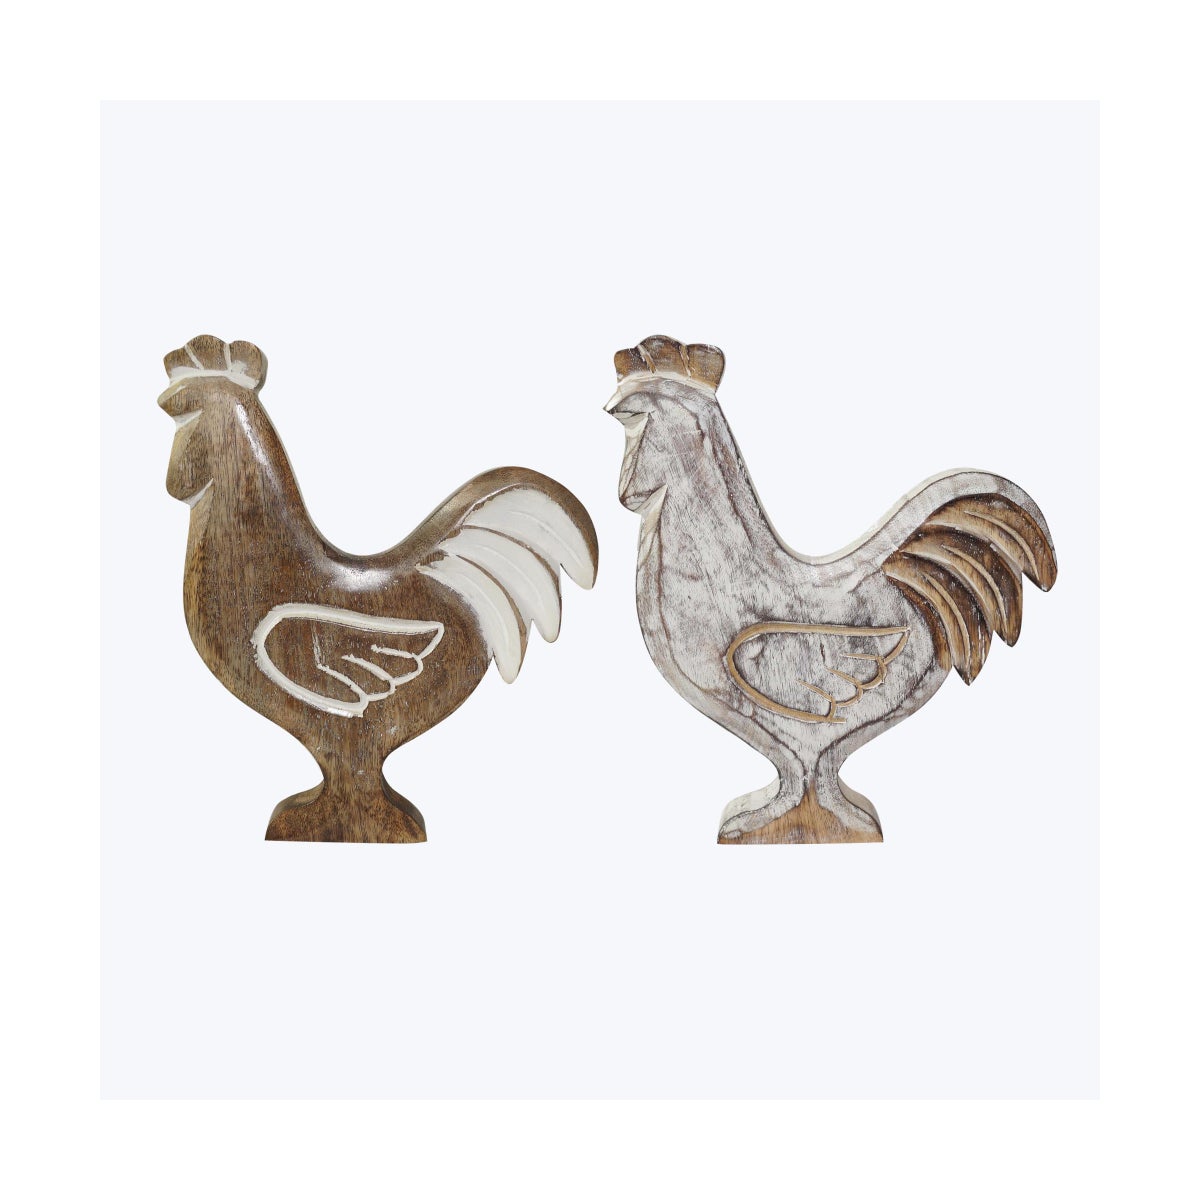 Mango Wood Carved Rooster, 2 Ast